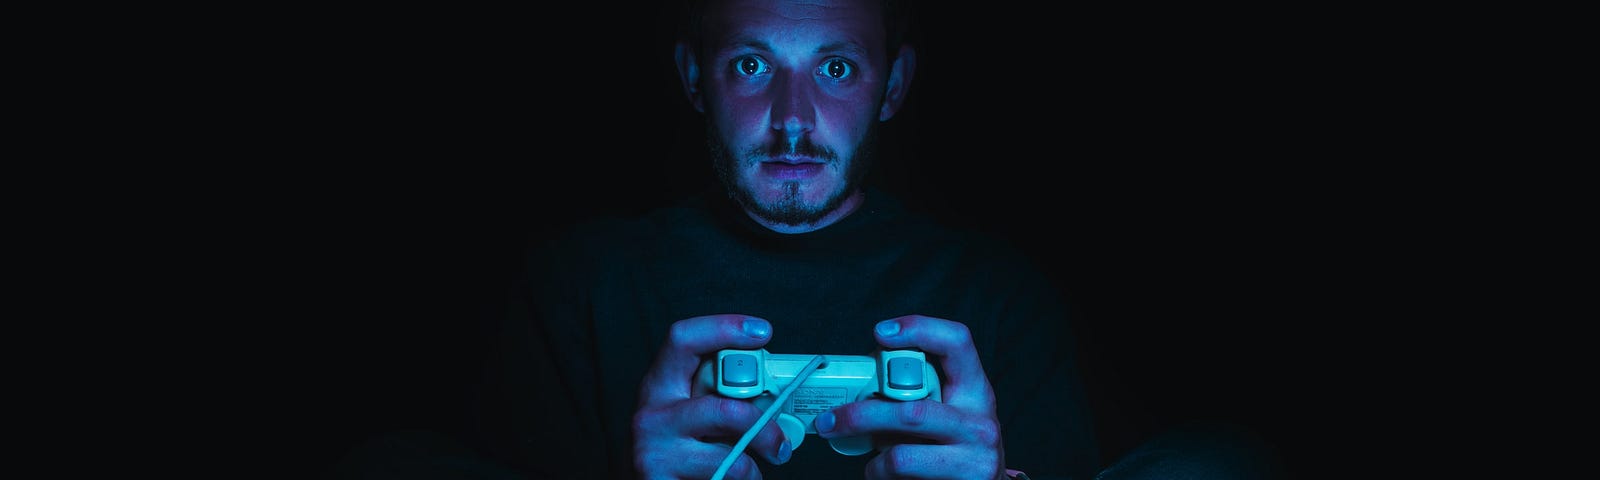 A frightened-looking man plays horror games in the dark.